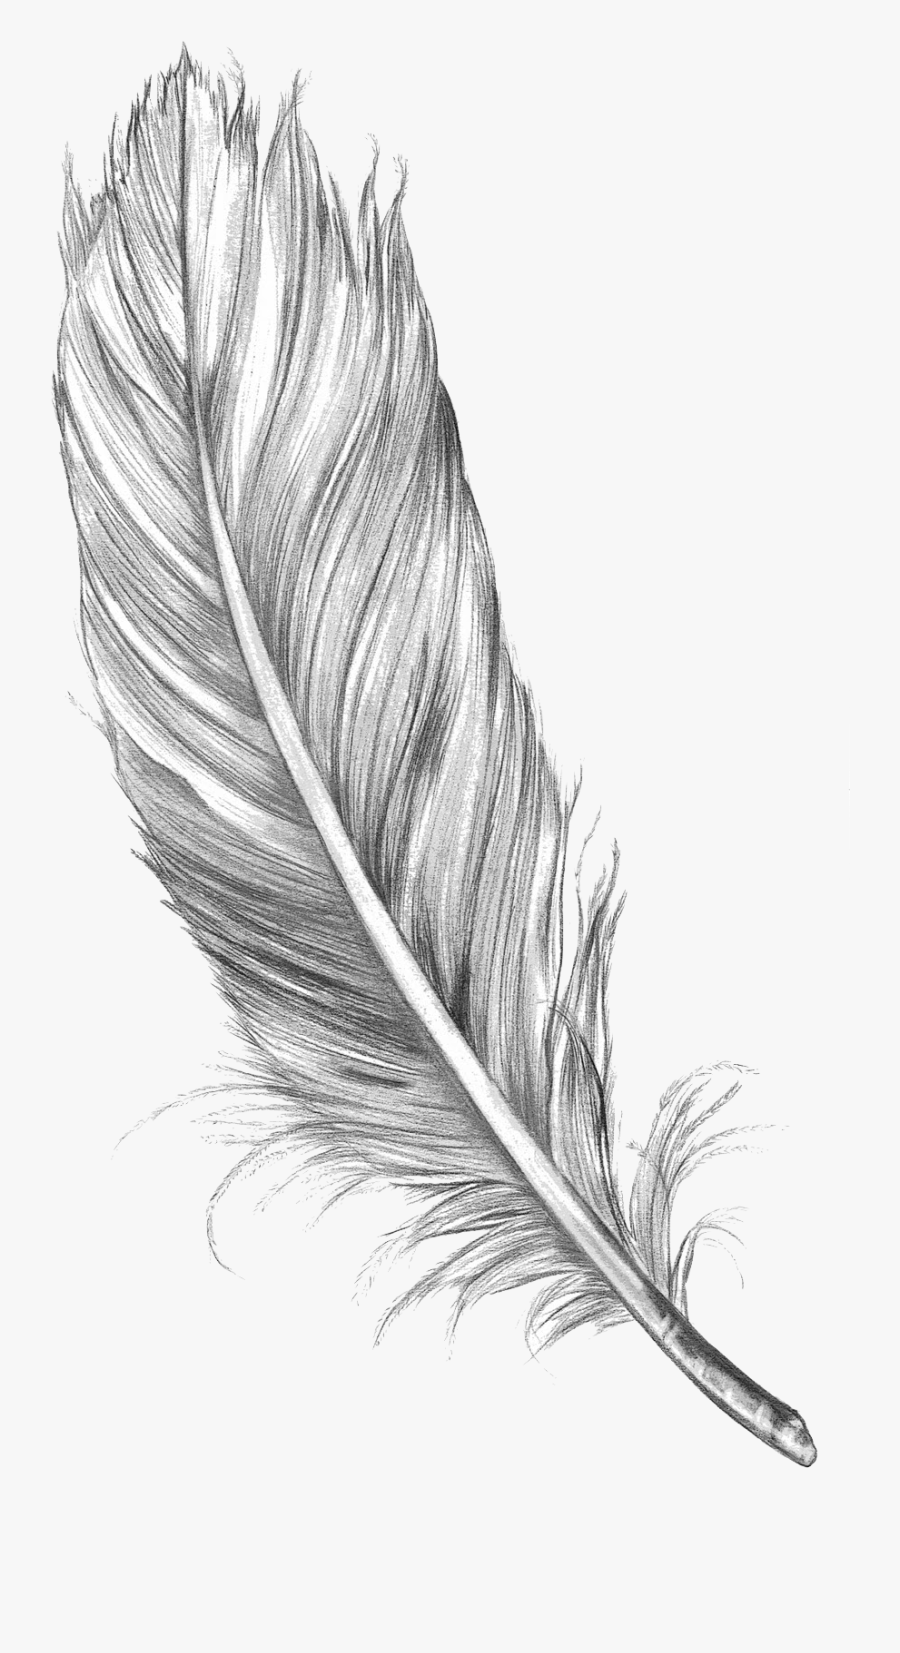 Feather Art Drawing Sketch Bird Free Hd Image Clipart - Feather Sketch, Transparent Clipart